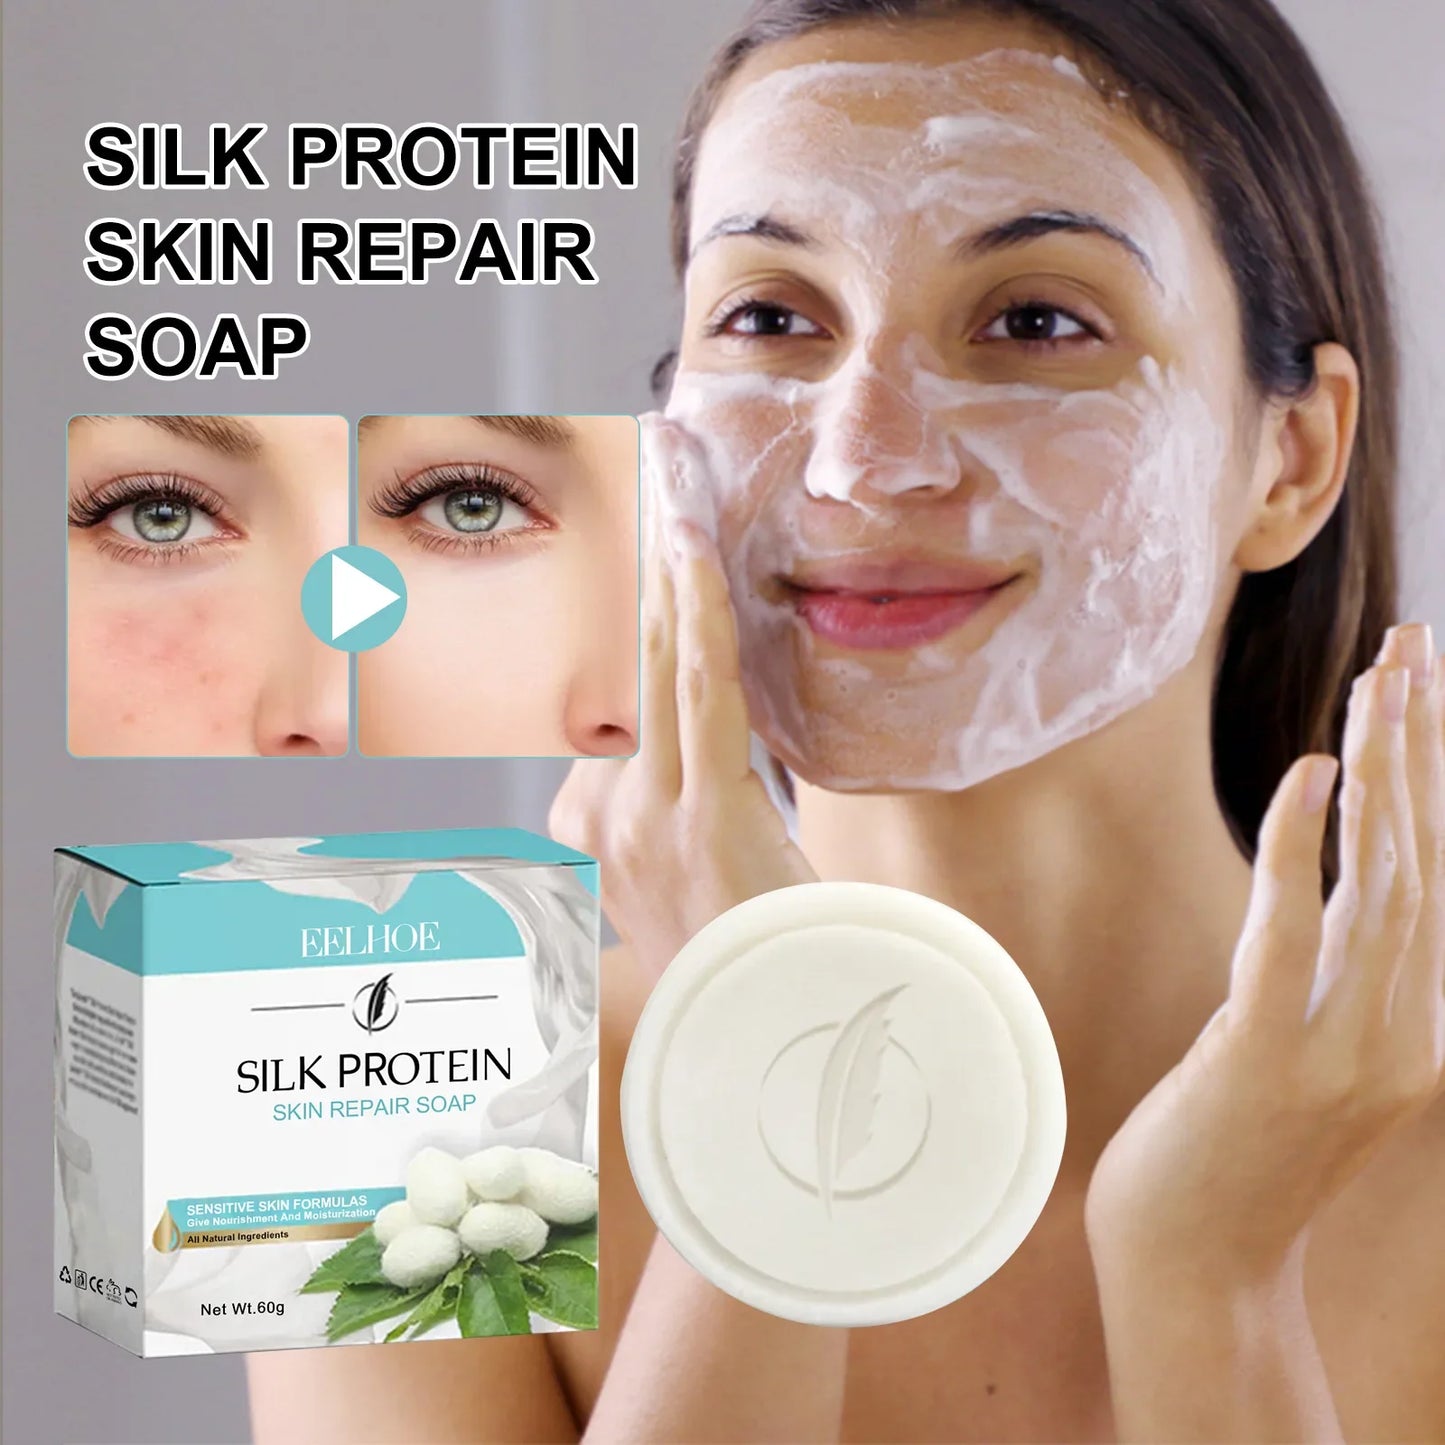 Protein repair facial soap cleans pores, lightens acne and dark spots, moisturizes and whitens skin, and washes face soap.